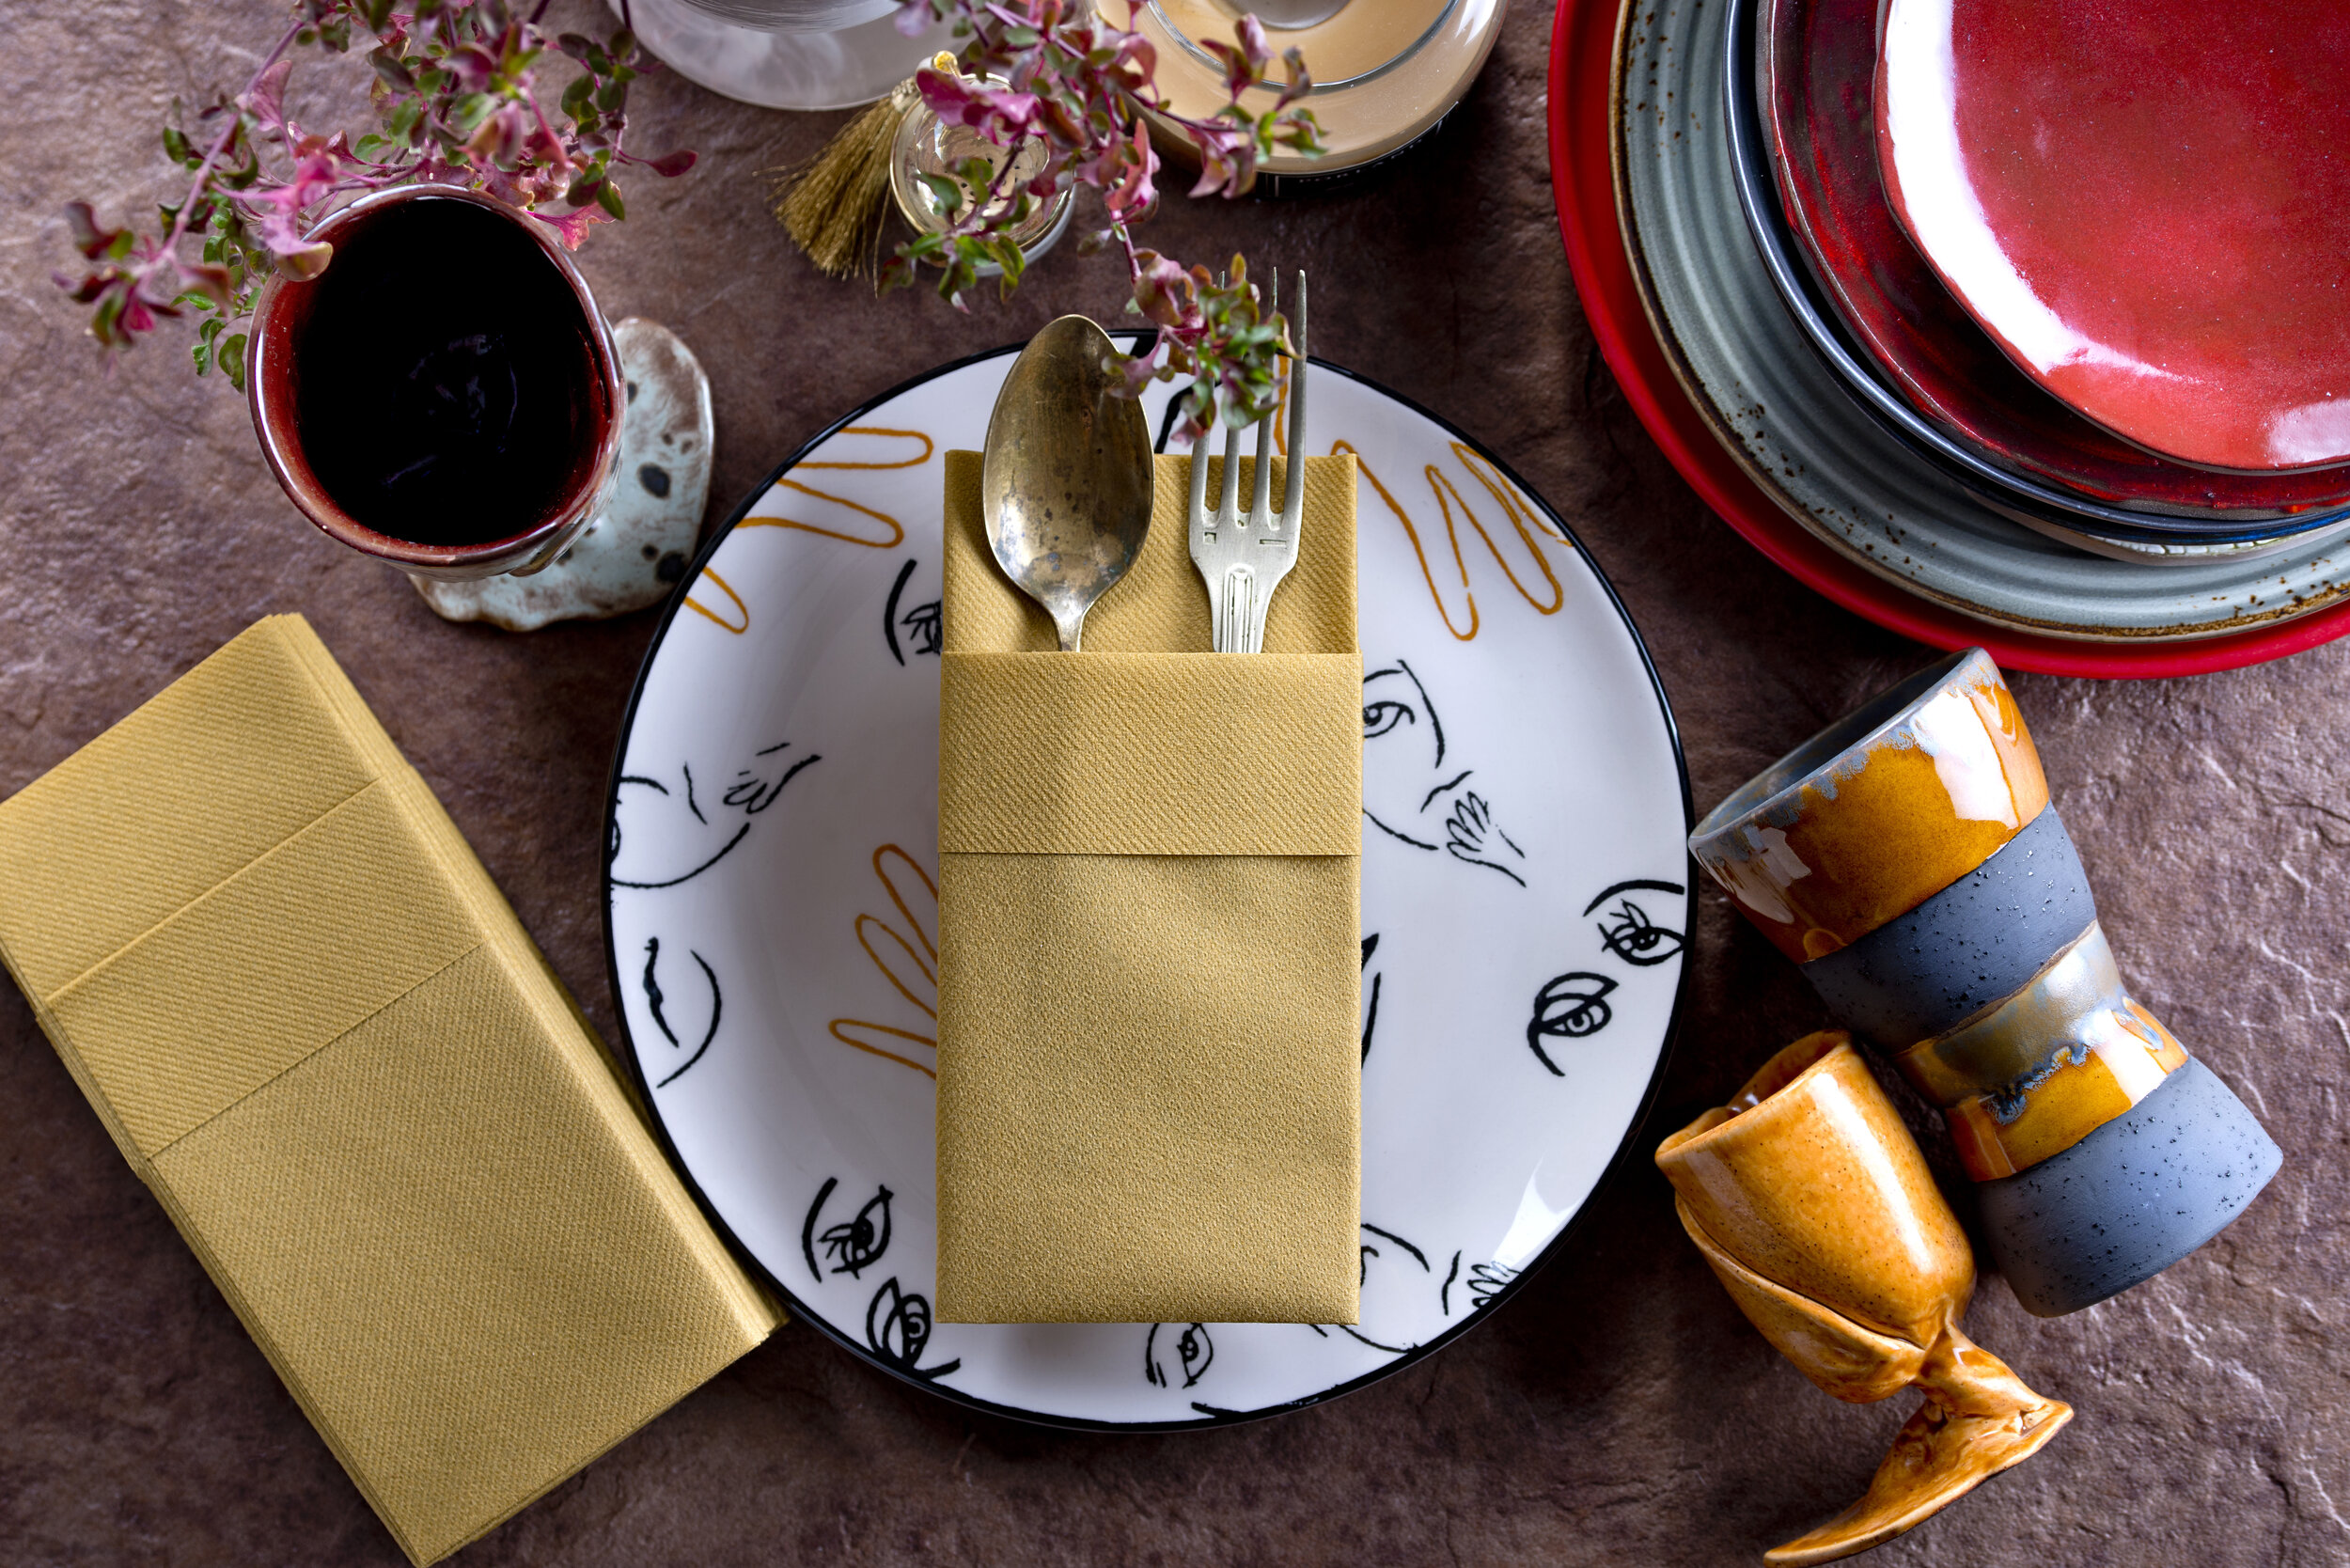 Yellow Paper Napkins | Linen Feel Guest Disposable Cloth Like Dinner  Napkins | Hand Towels | Soft, Absorbent, Paper Hand Napkins for Kitchen